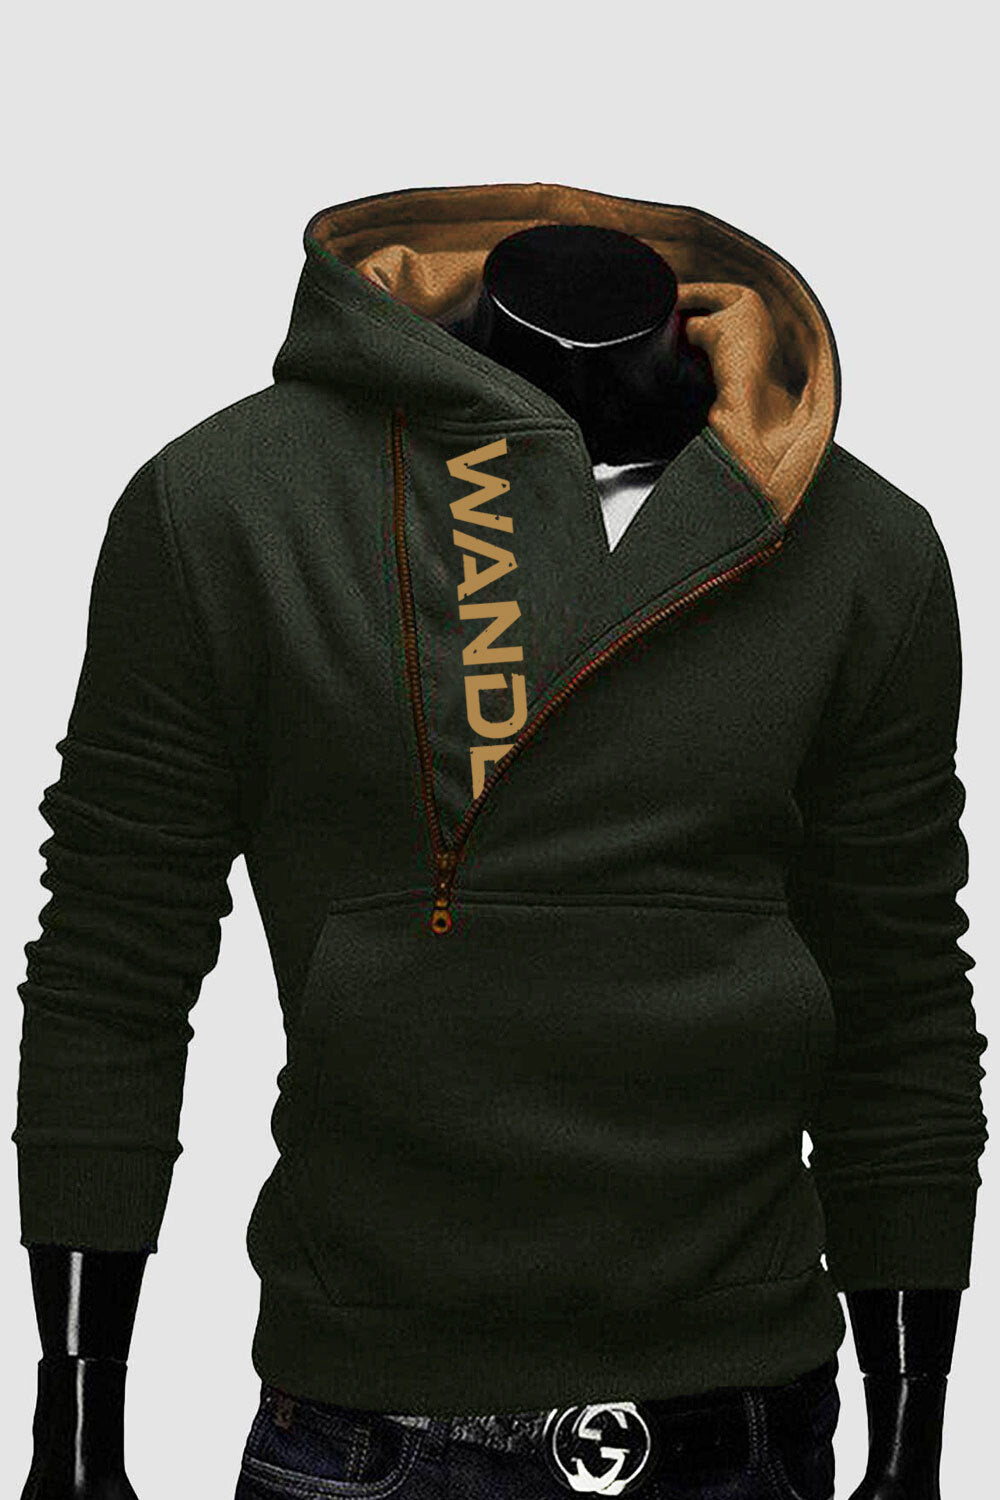 Wander - Limited Edition